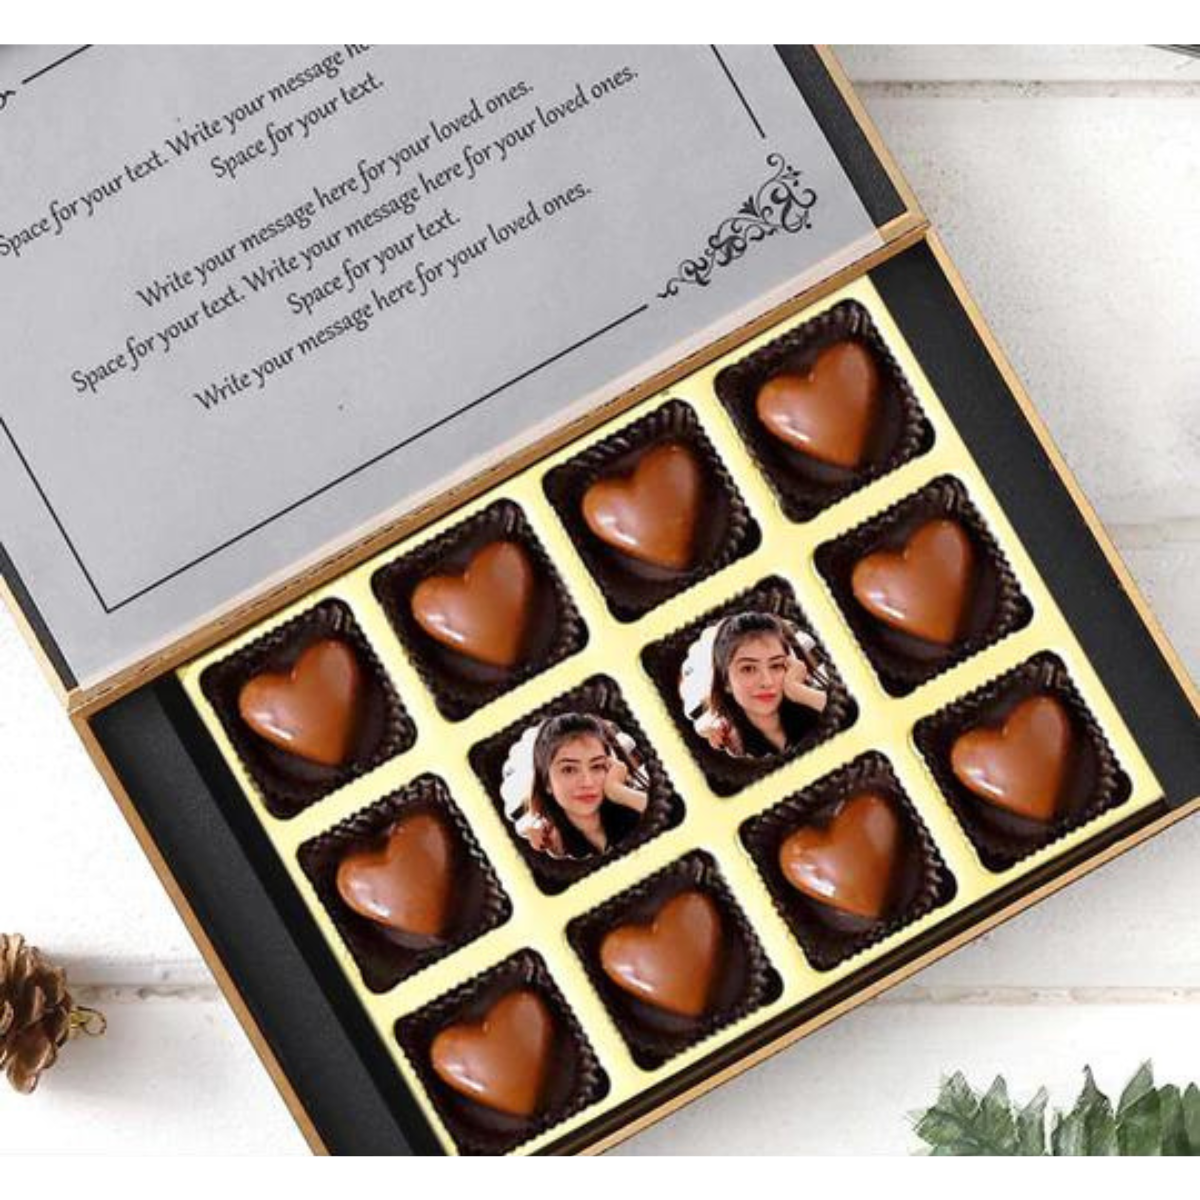 Valentine Love Special Greetings Personalised Photo Chocolate